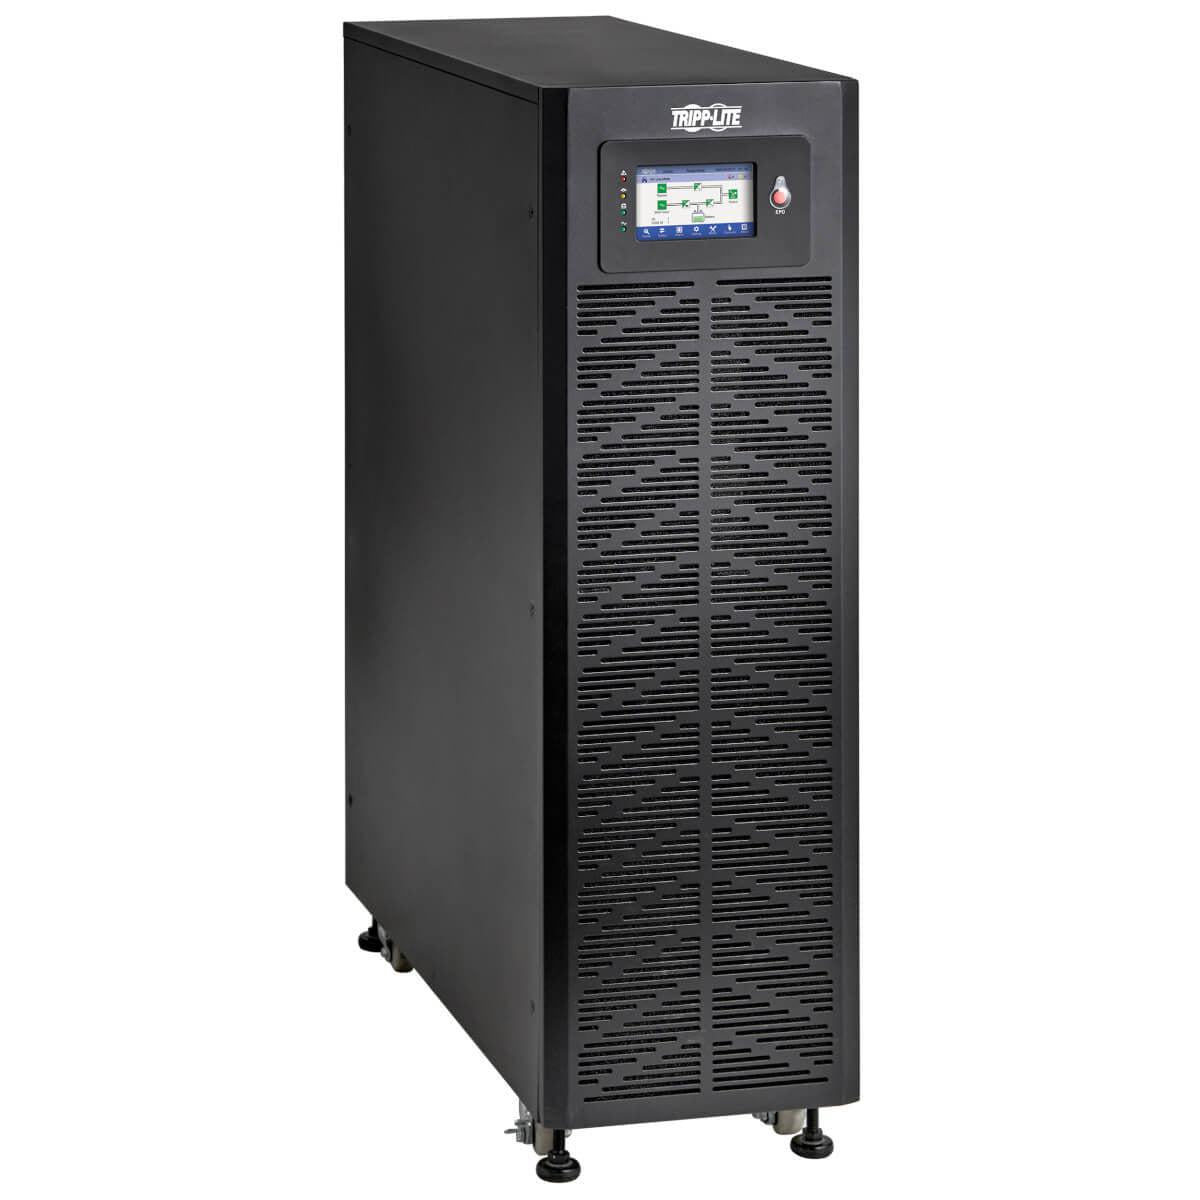 Tripp Lite 3-Phase 208/220/120/127V 25Kva/Kw Double-Conversion Ups - Unity Pf, External Batteries Required